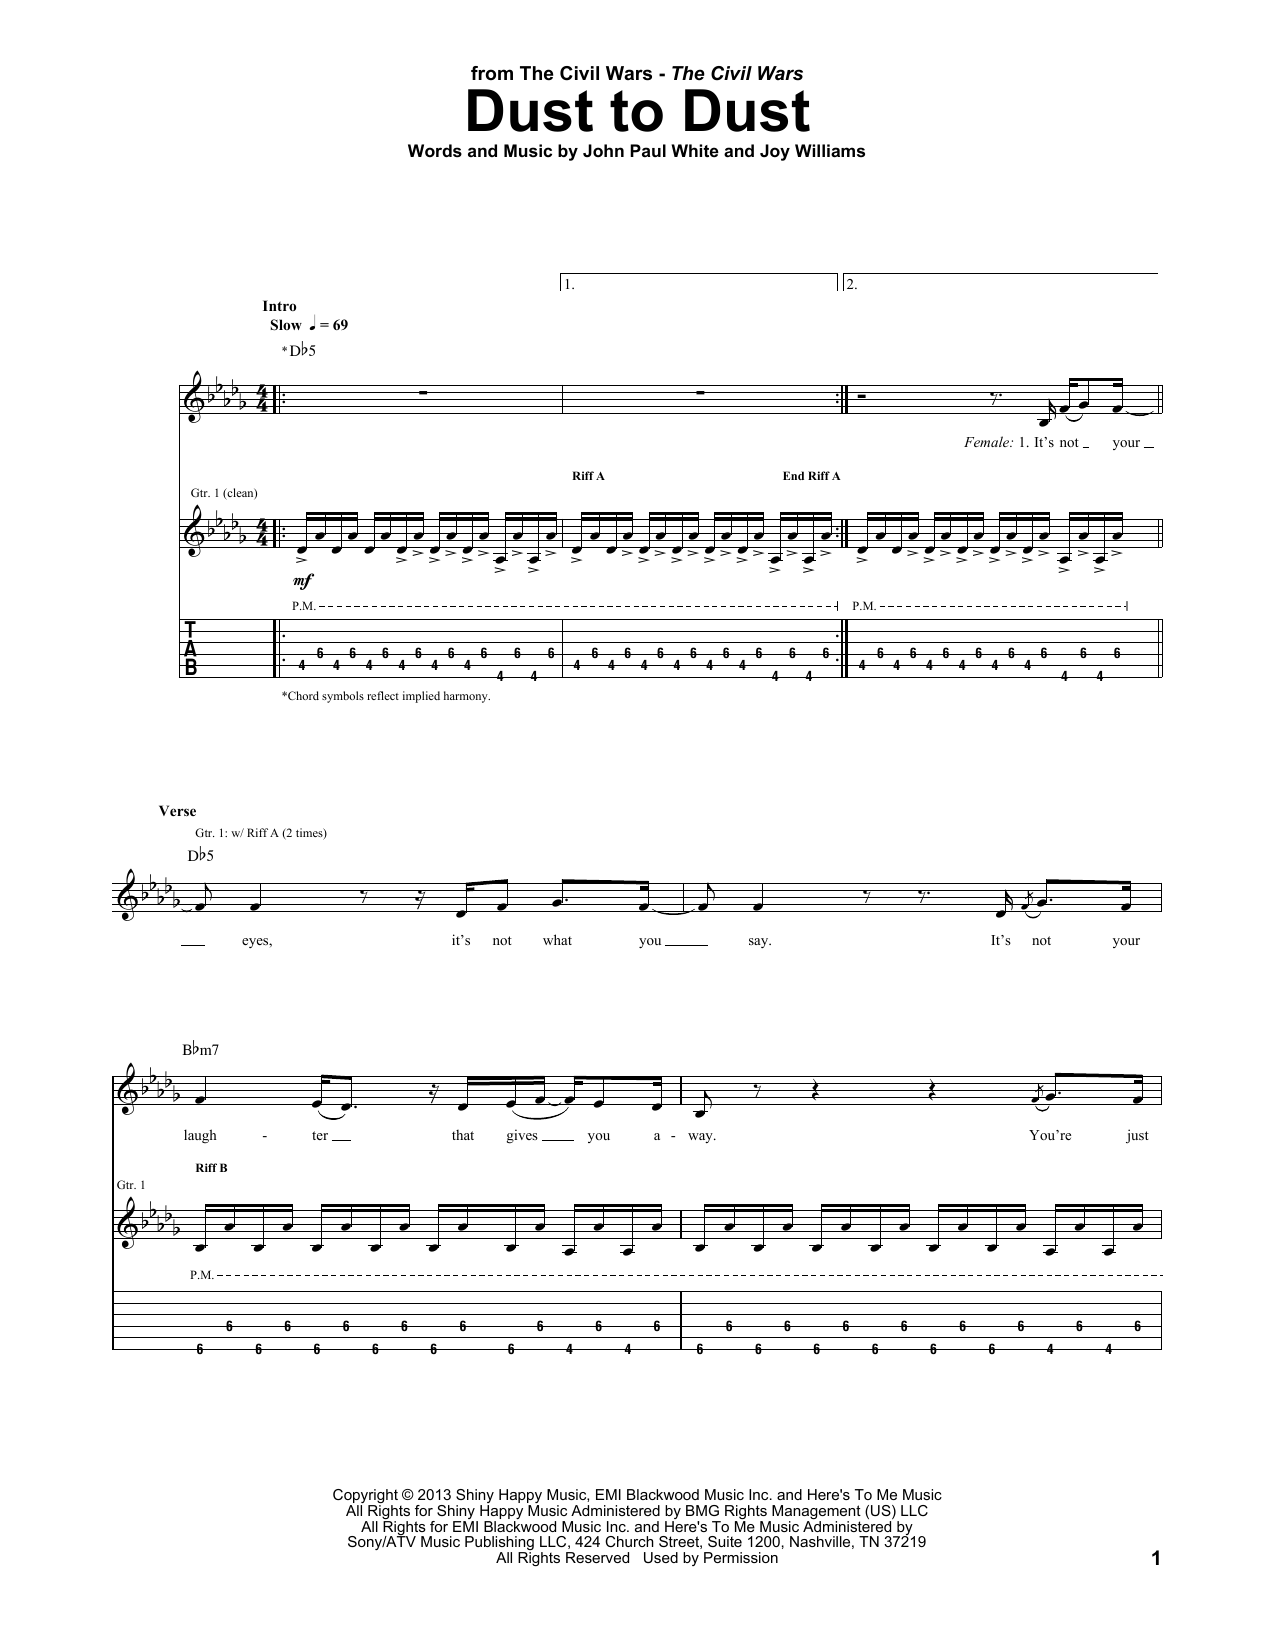 Download The Civil Wars Dust To Dust Sheet Music